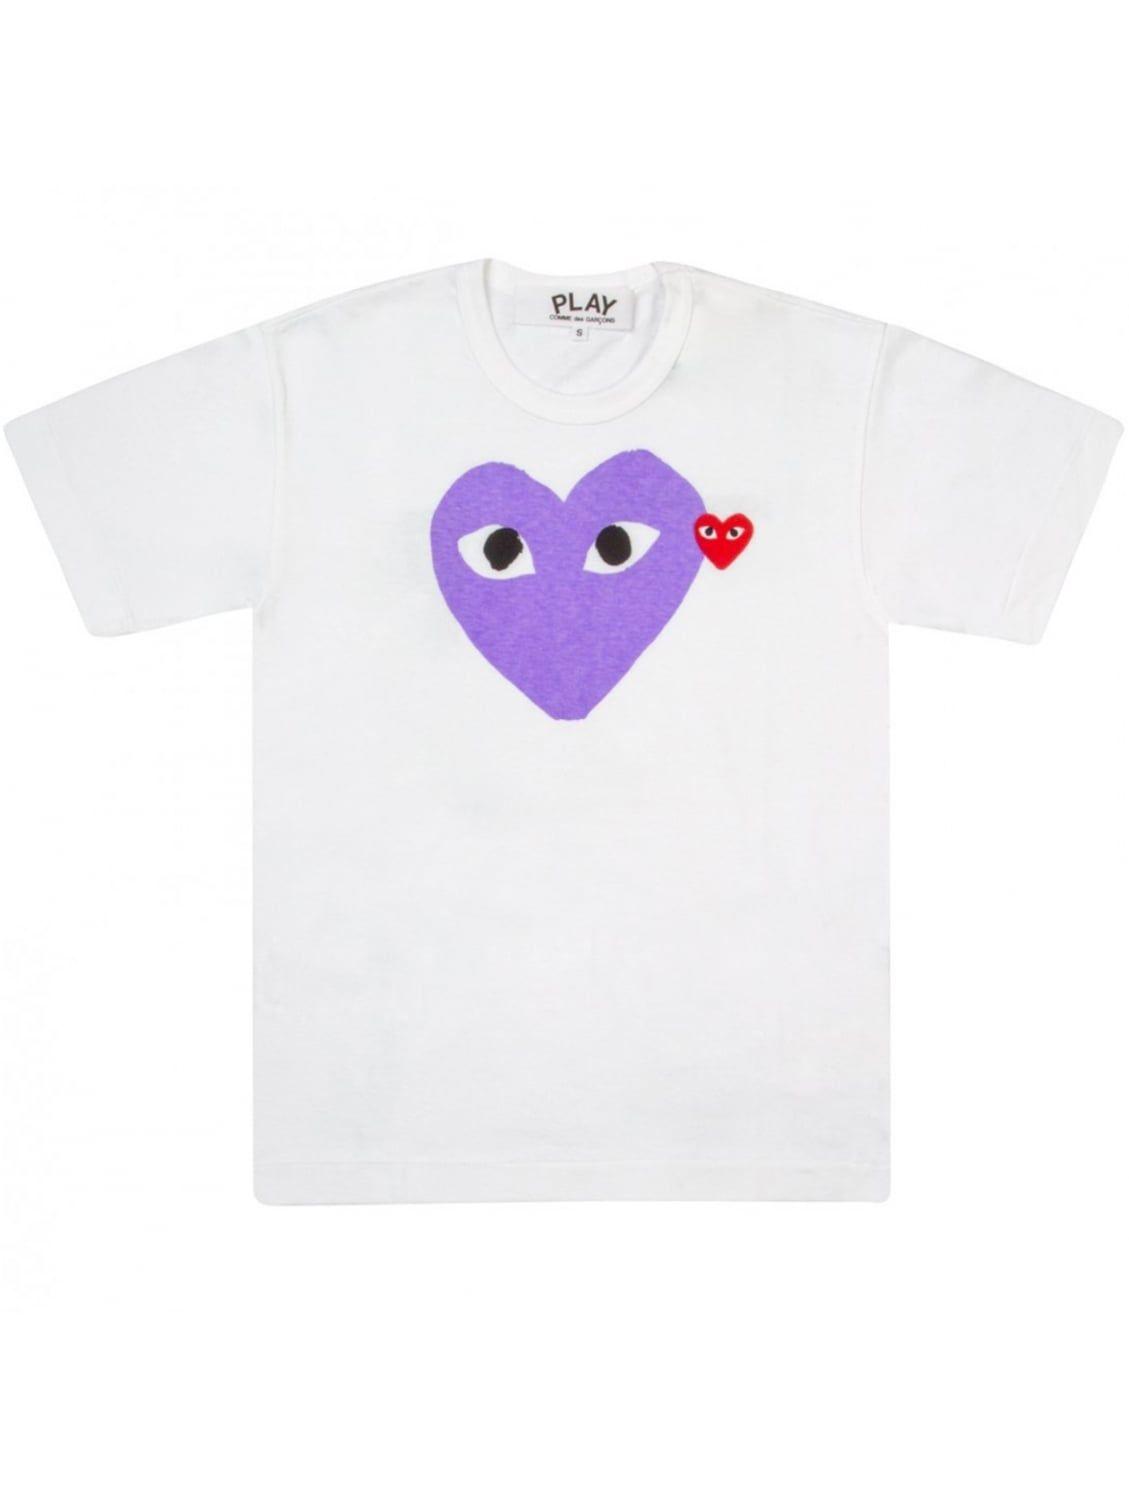 CDG Heart Logo - Comme Des Garcons Clothing | PLAY Ladies Lilac Heart Logo T Shirt ...